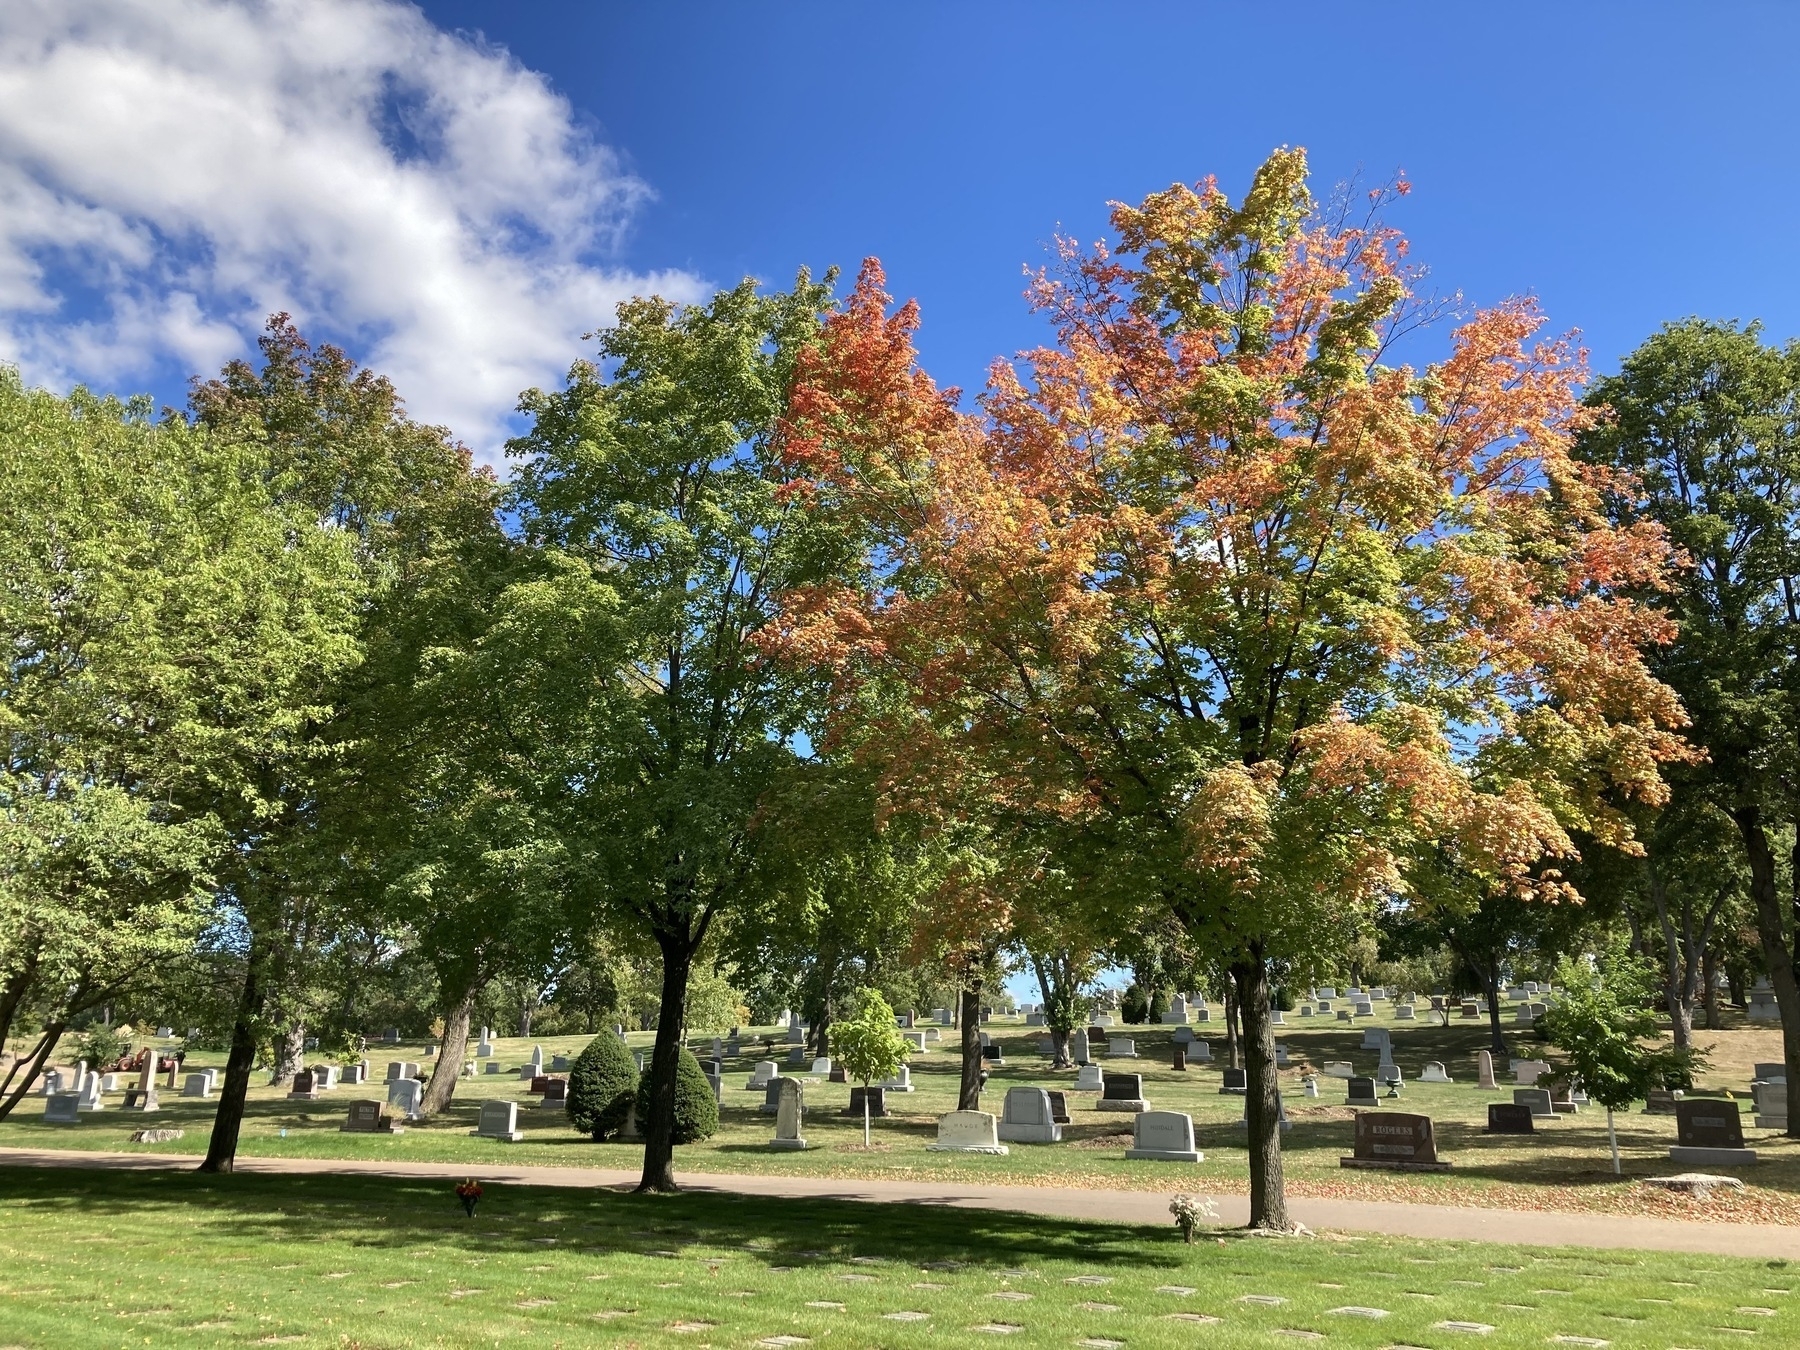 cemetery on a sunny afternoon under blue skies, a row of three maples, one of whose leaves have begun to turn orange